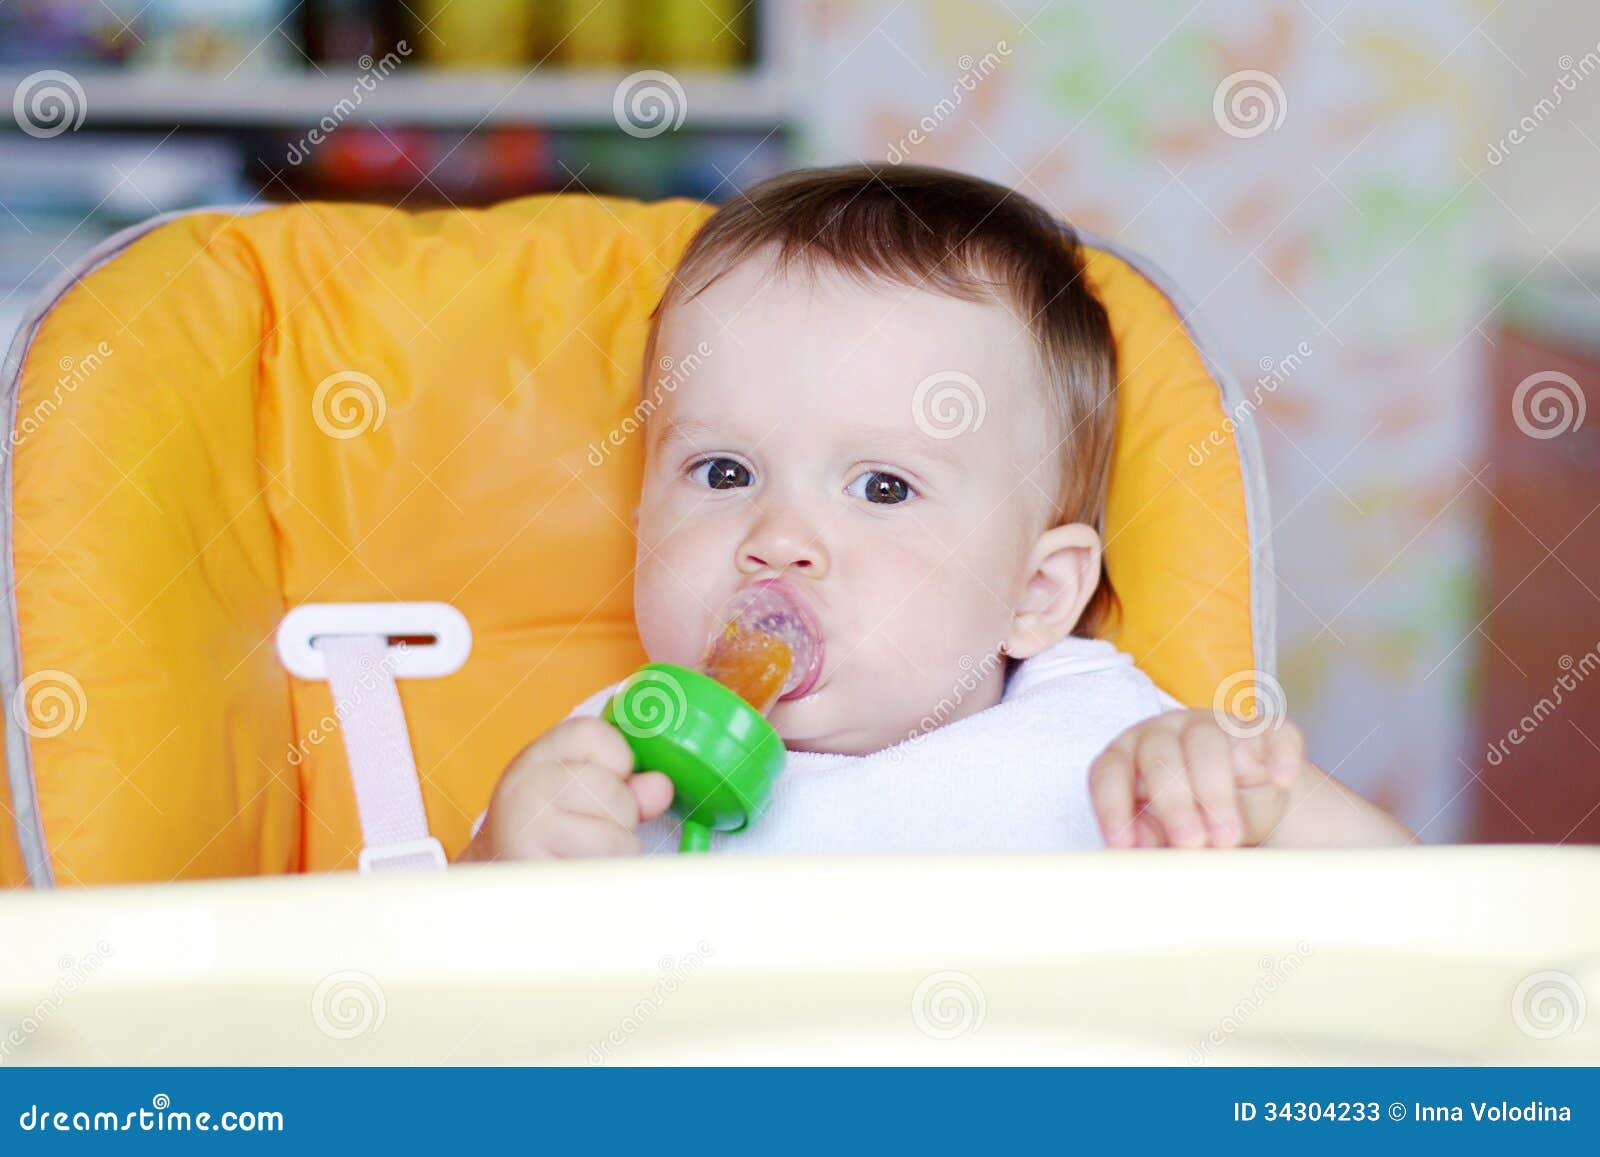 nice baby eats fruits by using nibbler